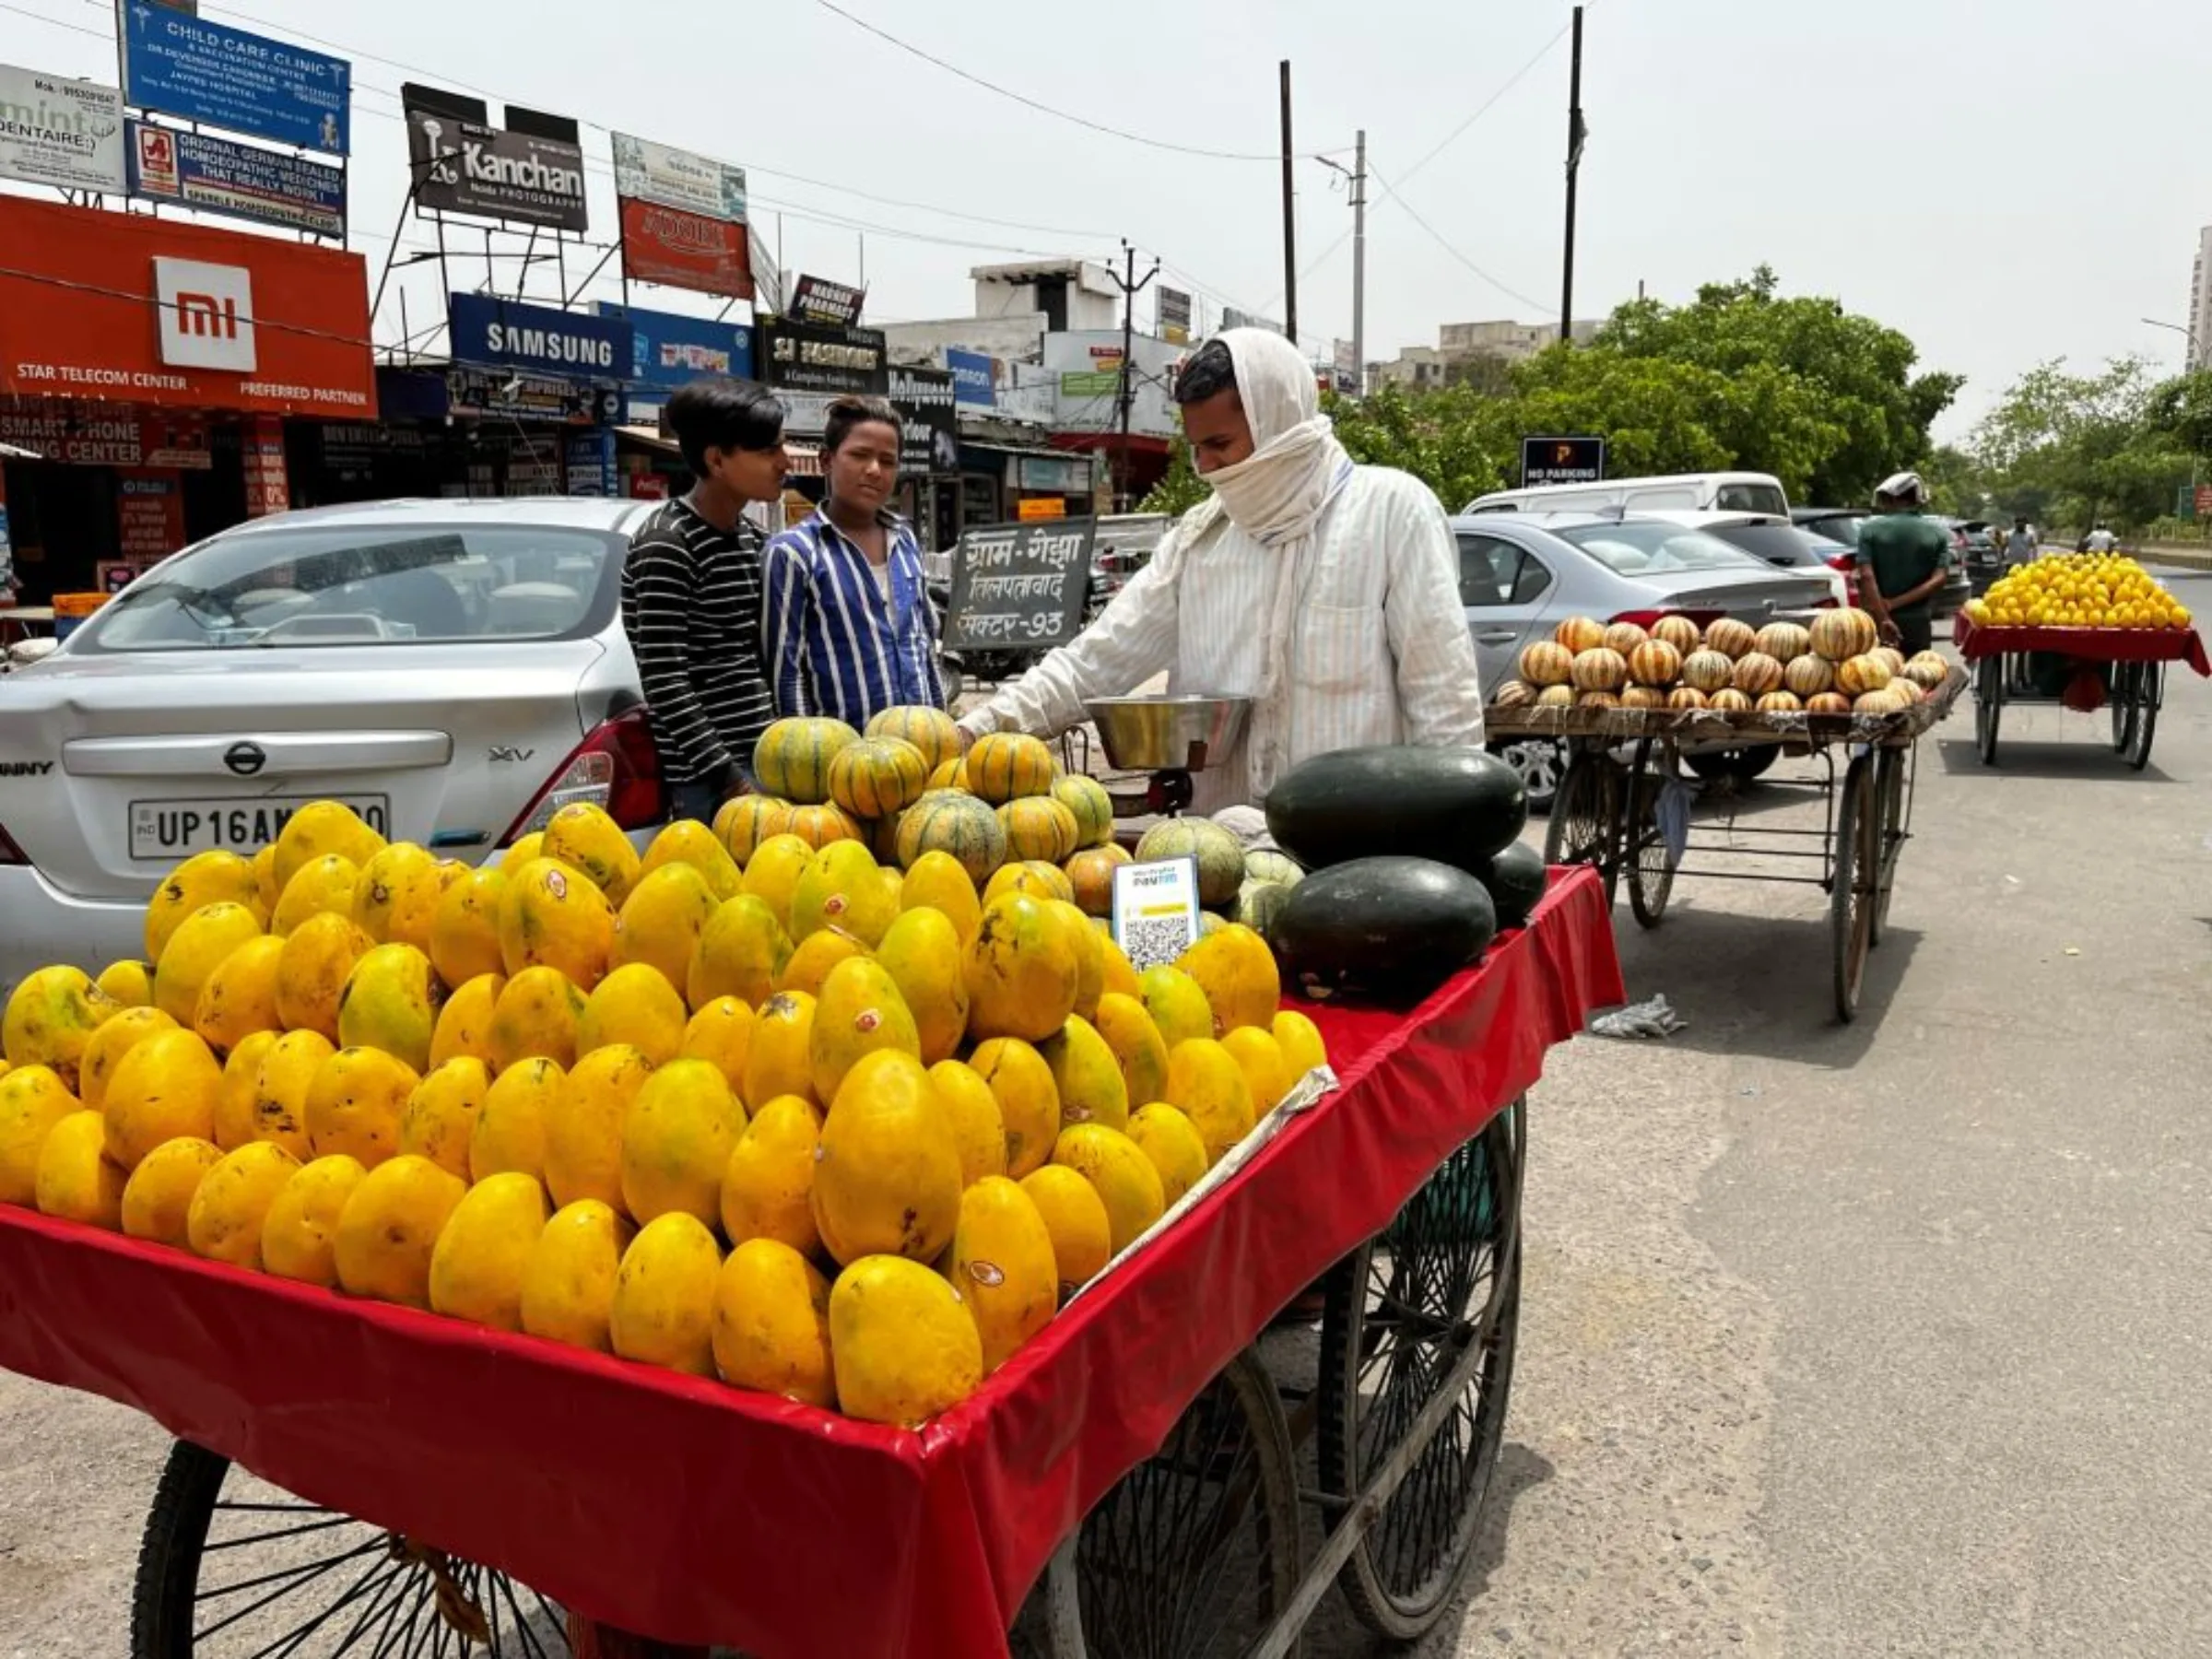 Fruit seller Mohammad Ikrar waits for customers during an intense heatwave in Noida, India, May 18, 2022